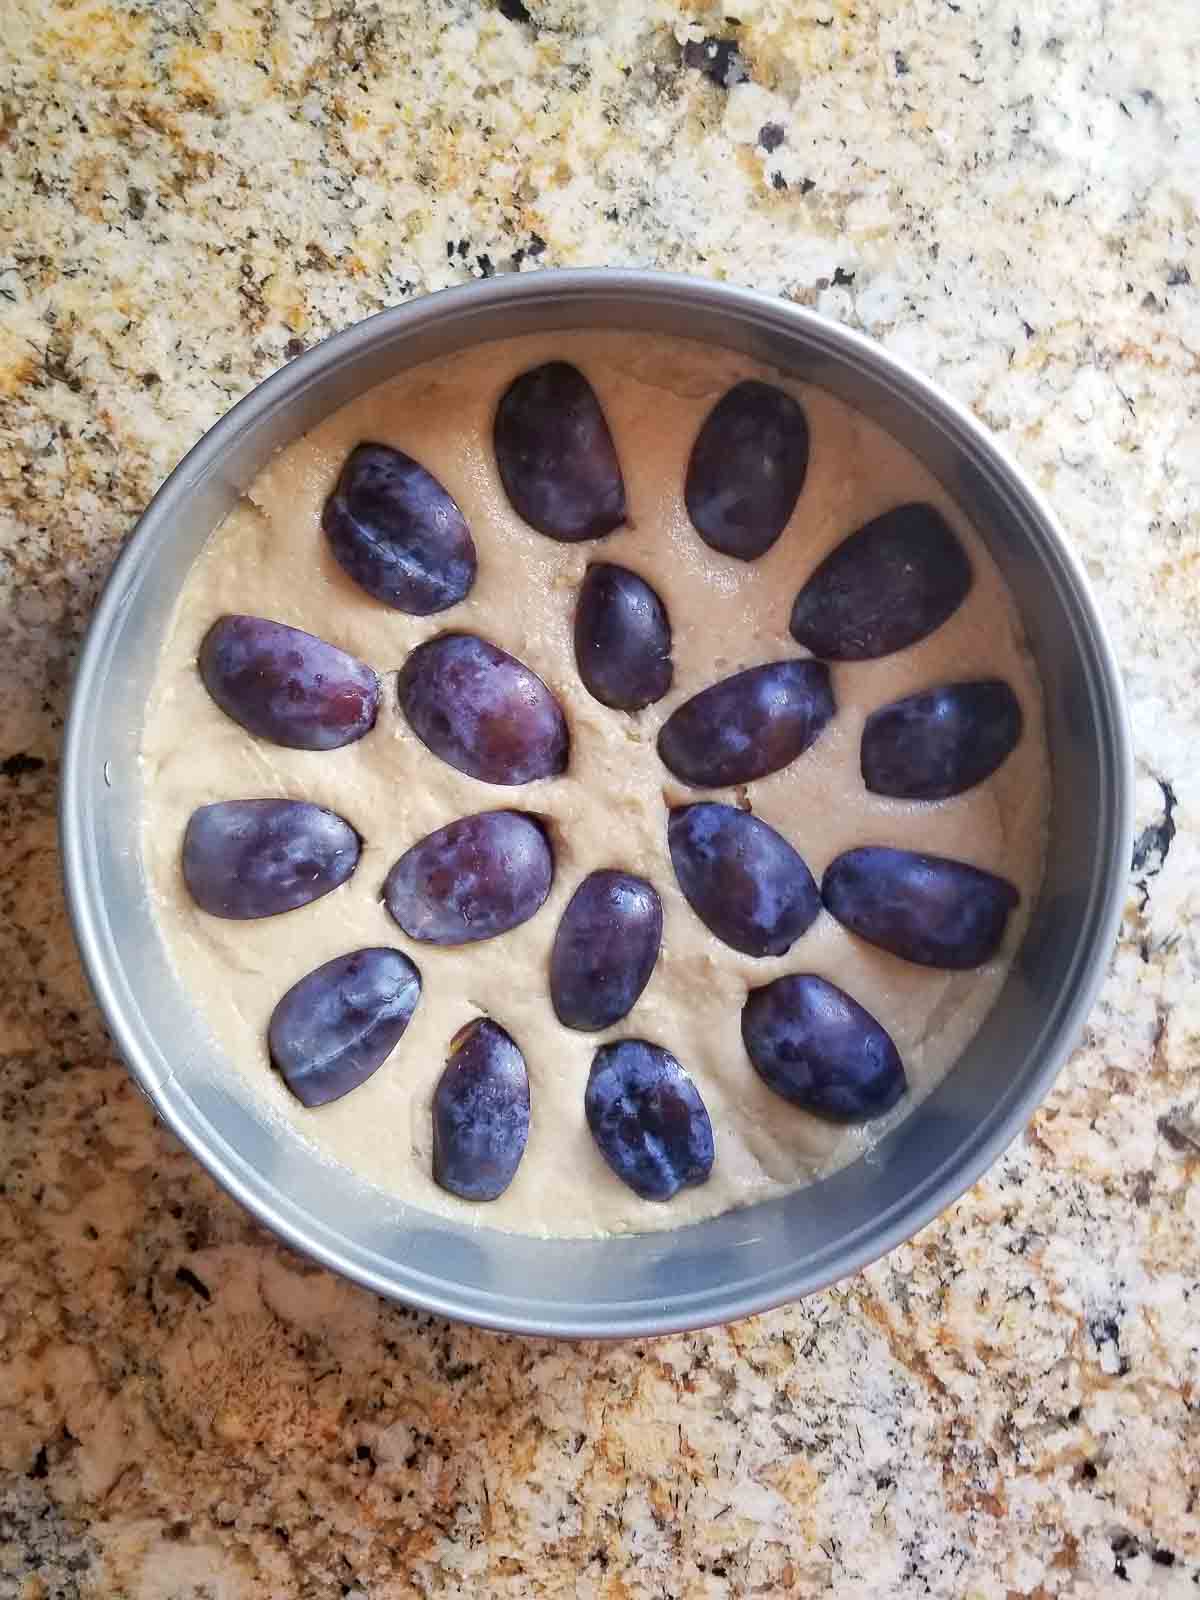 Cake batter for a plum cake in a round pan with olums placed on top ready to be placed in the oven.